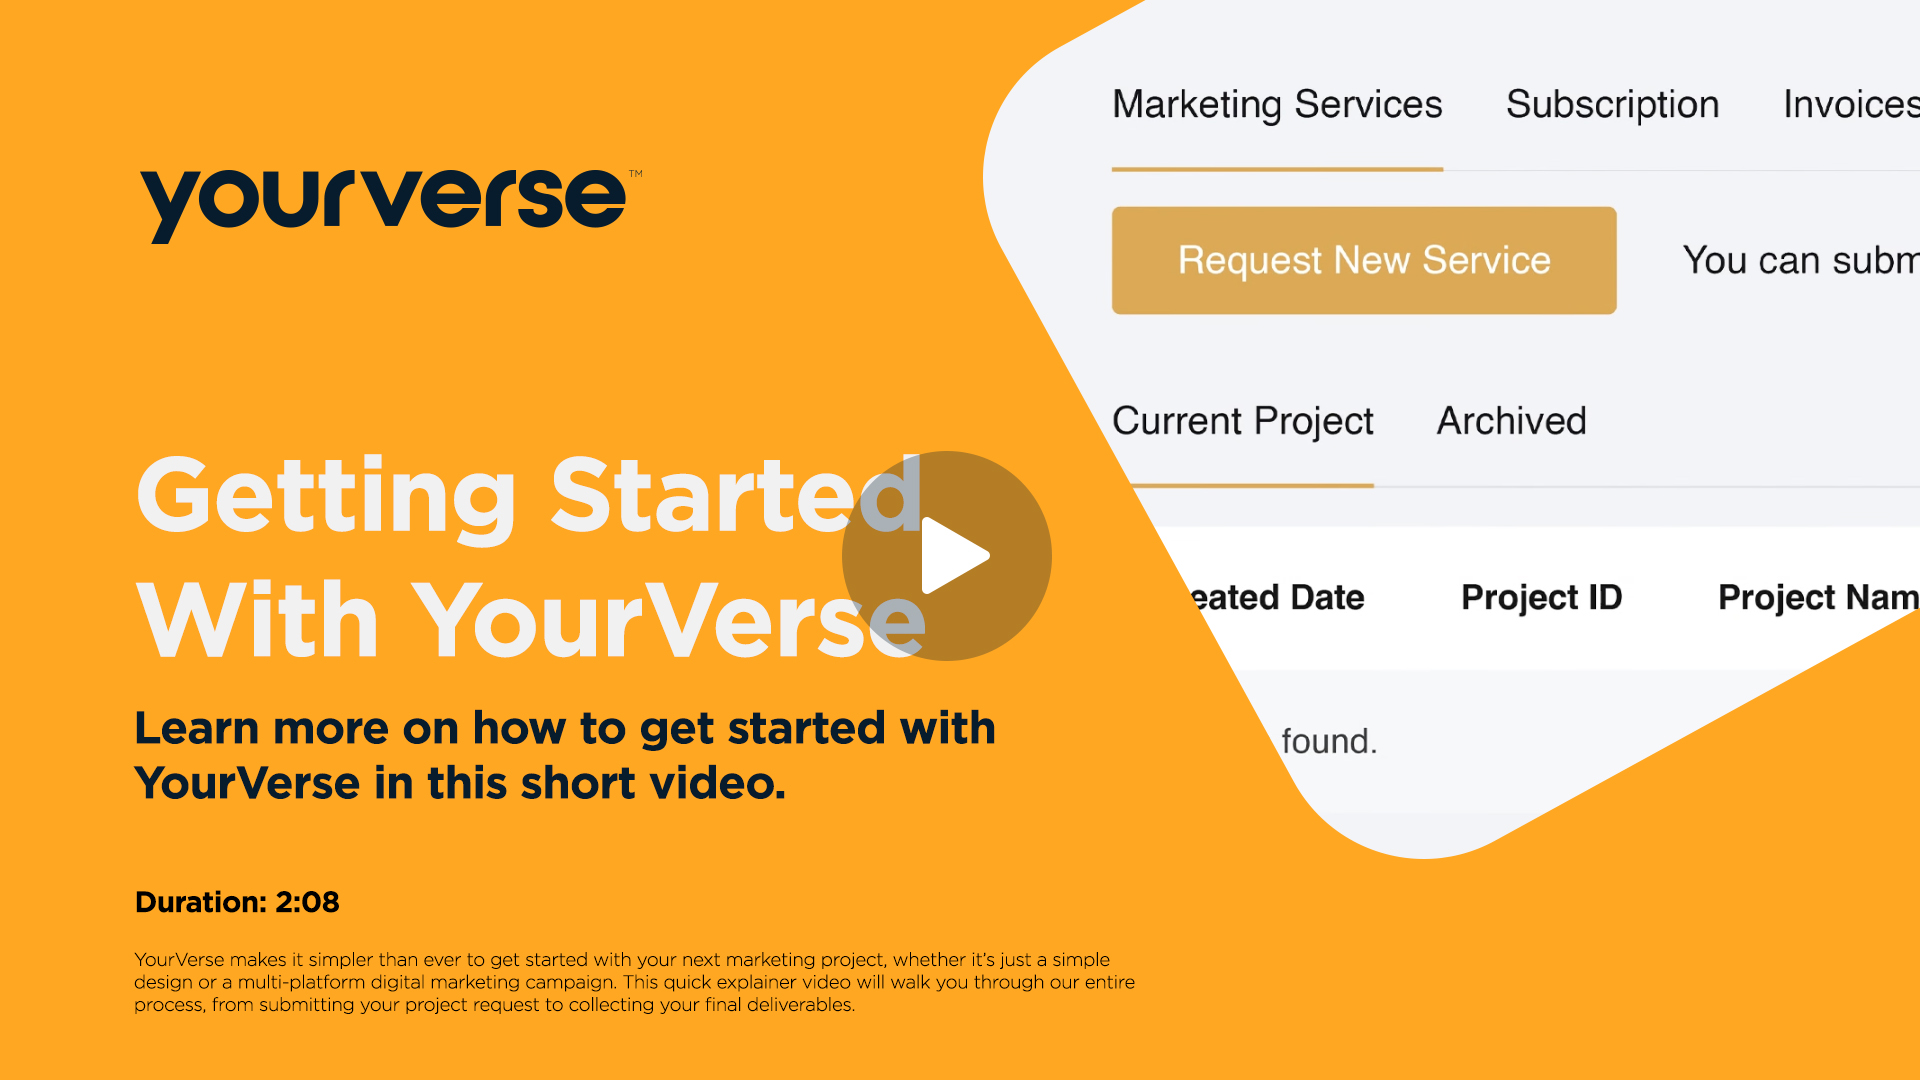 Getting Started With YourVerse